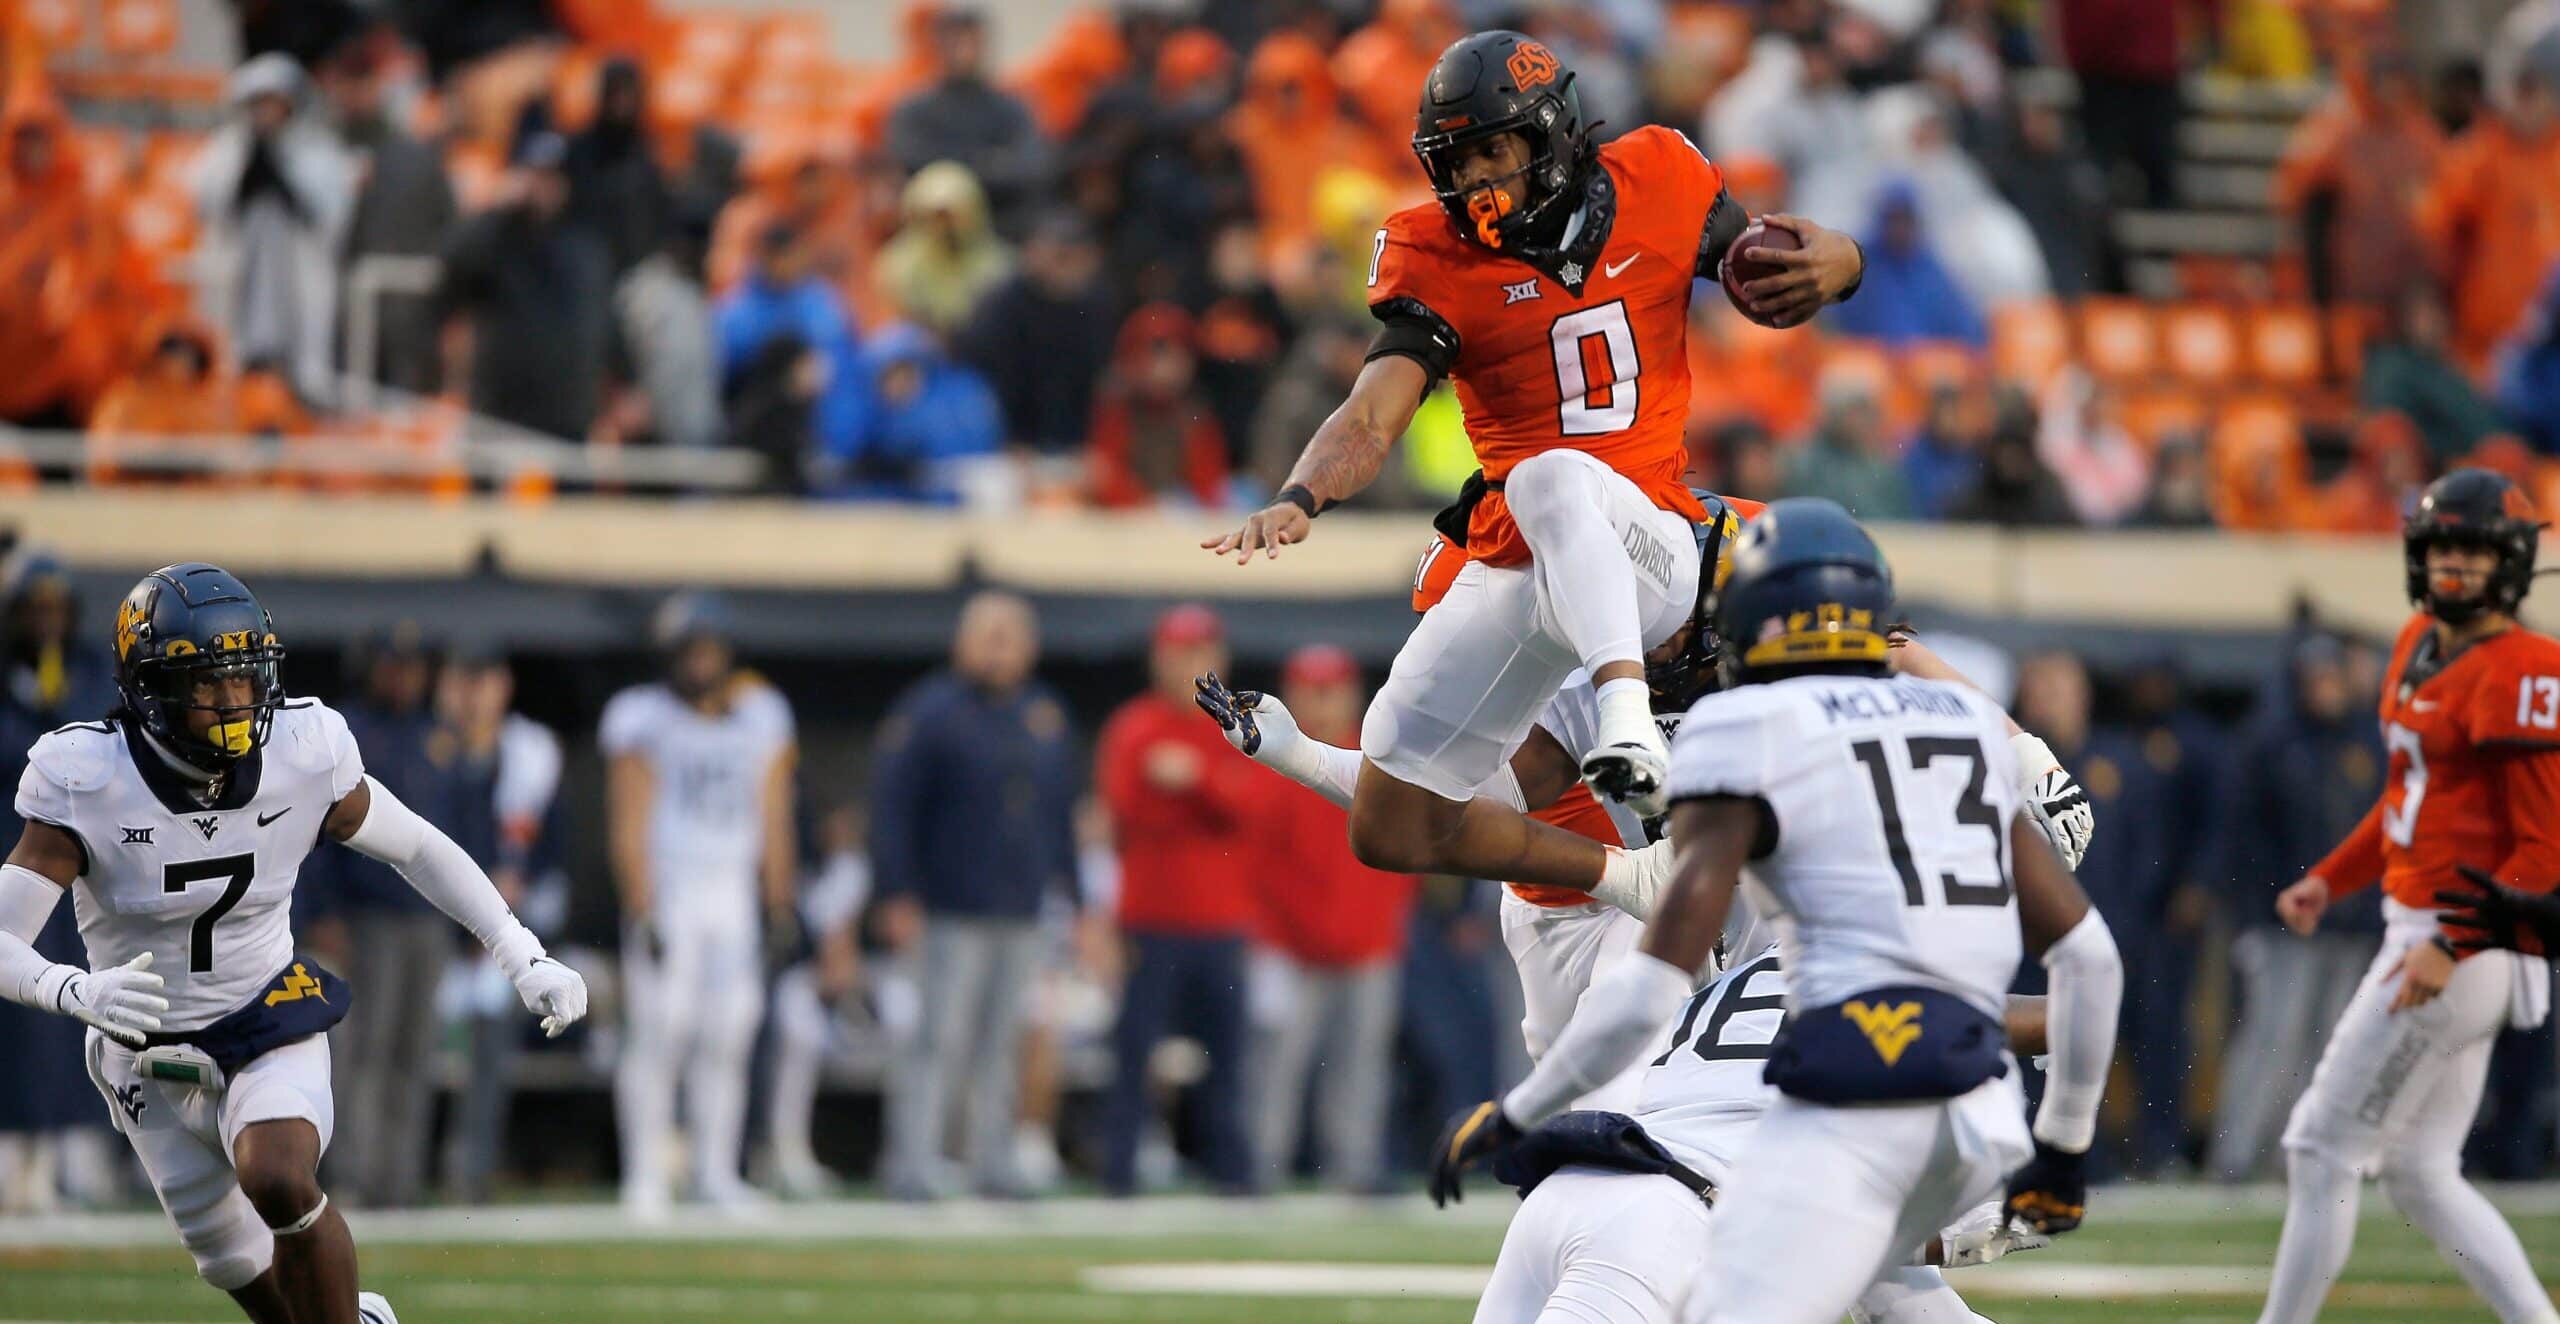 Oklahoma State Cowboys running back Ollie Gordon (0) leaps over West Virginia Mountaineers defensive back Caleb Coleman (16) during a college football game between Oklahoma State and West Virginia at Boone Pickens Stadium.